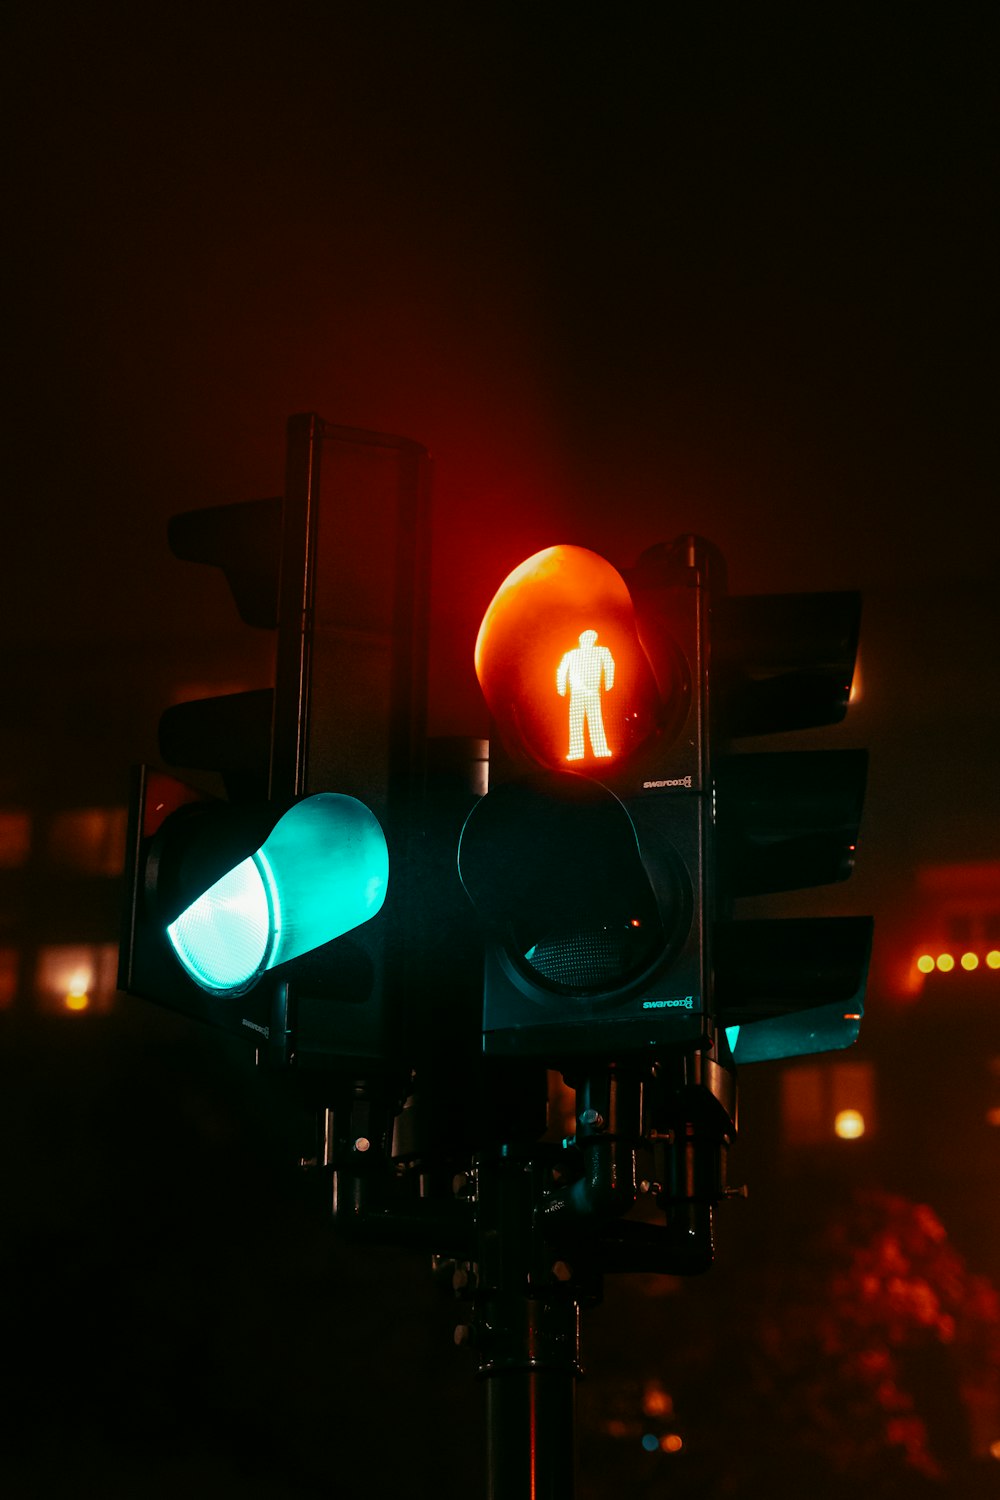 a traffic light with a red light and a green light